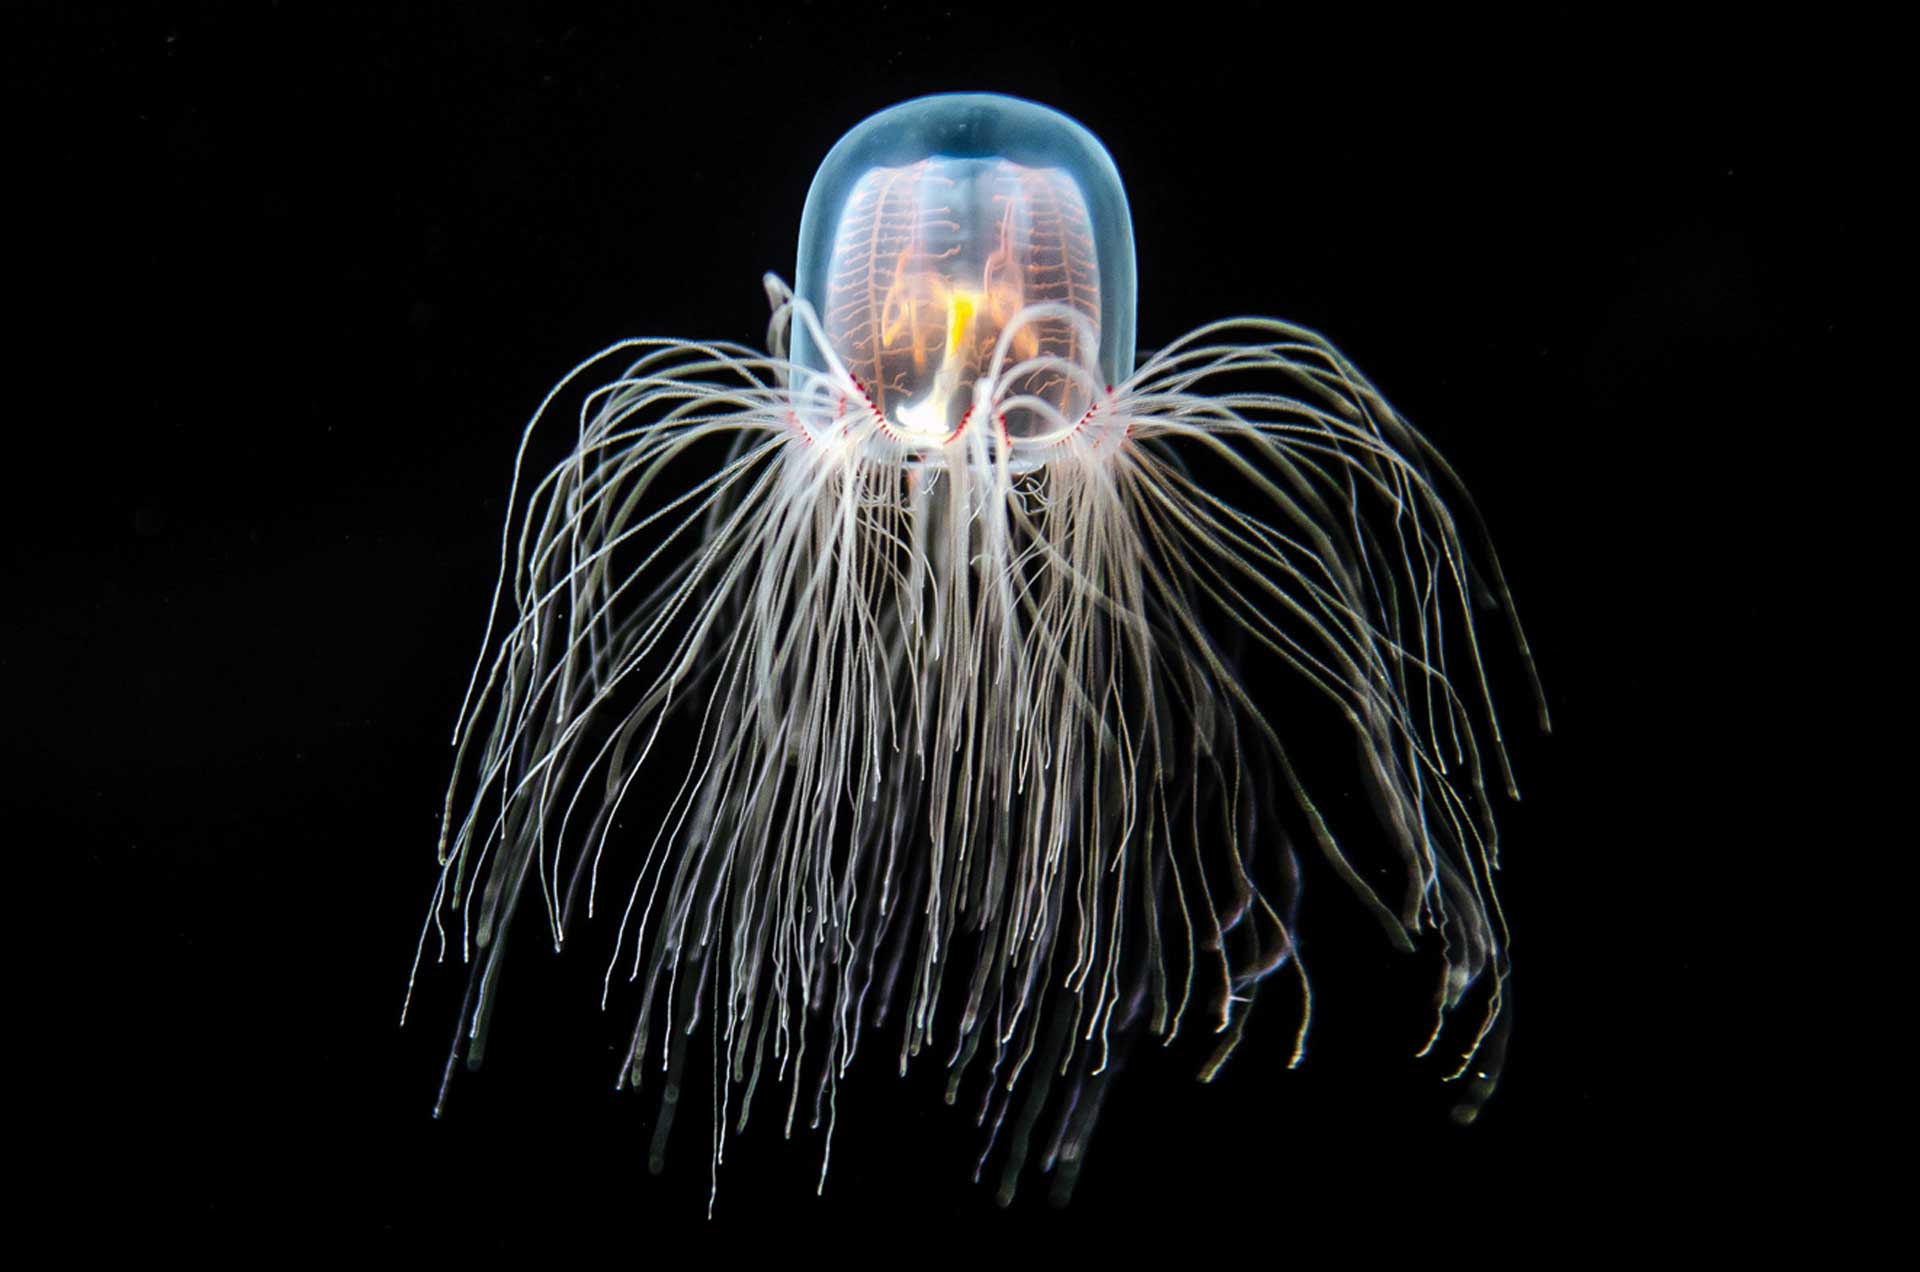 Turritopsis dohrnii is also known as 'immortal jellyfish', the only known animal capable of reverting completely to a sexually immature stage after having reached sexual maturity, which renders the jellyfish biologically immortal.